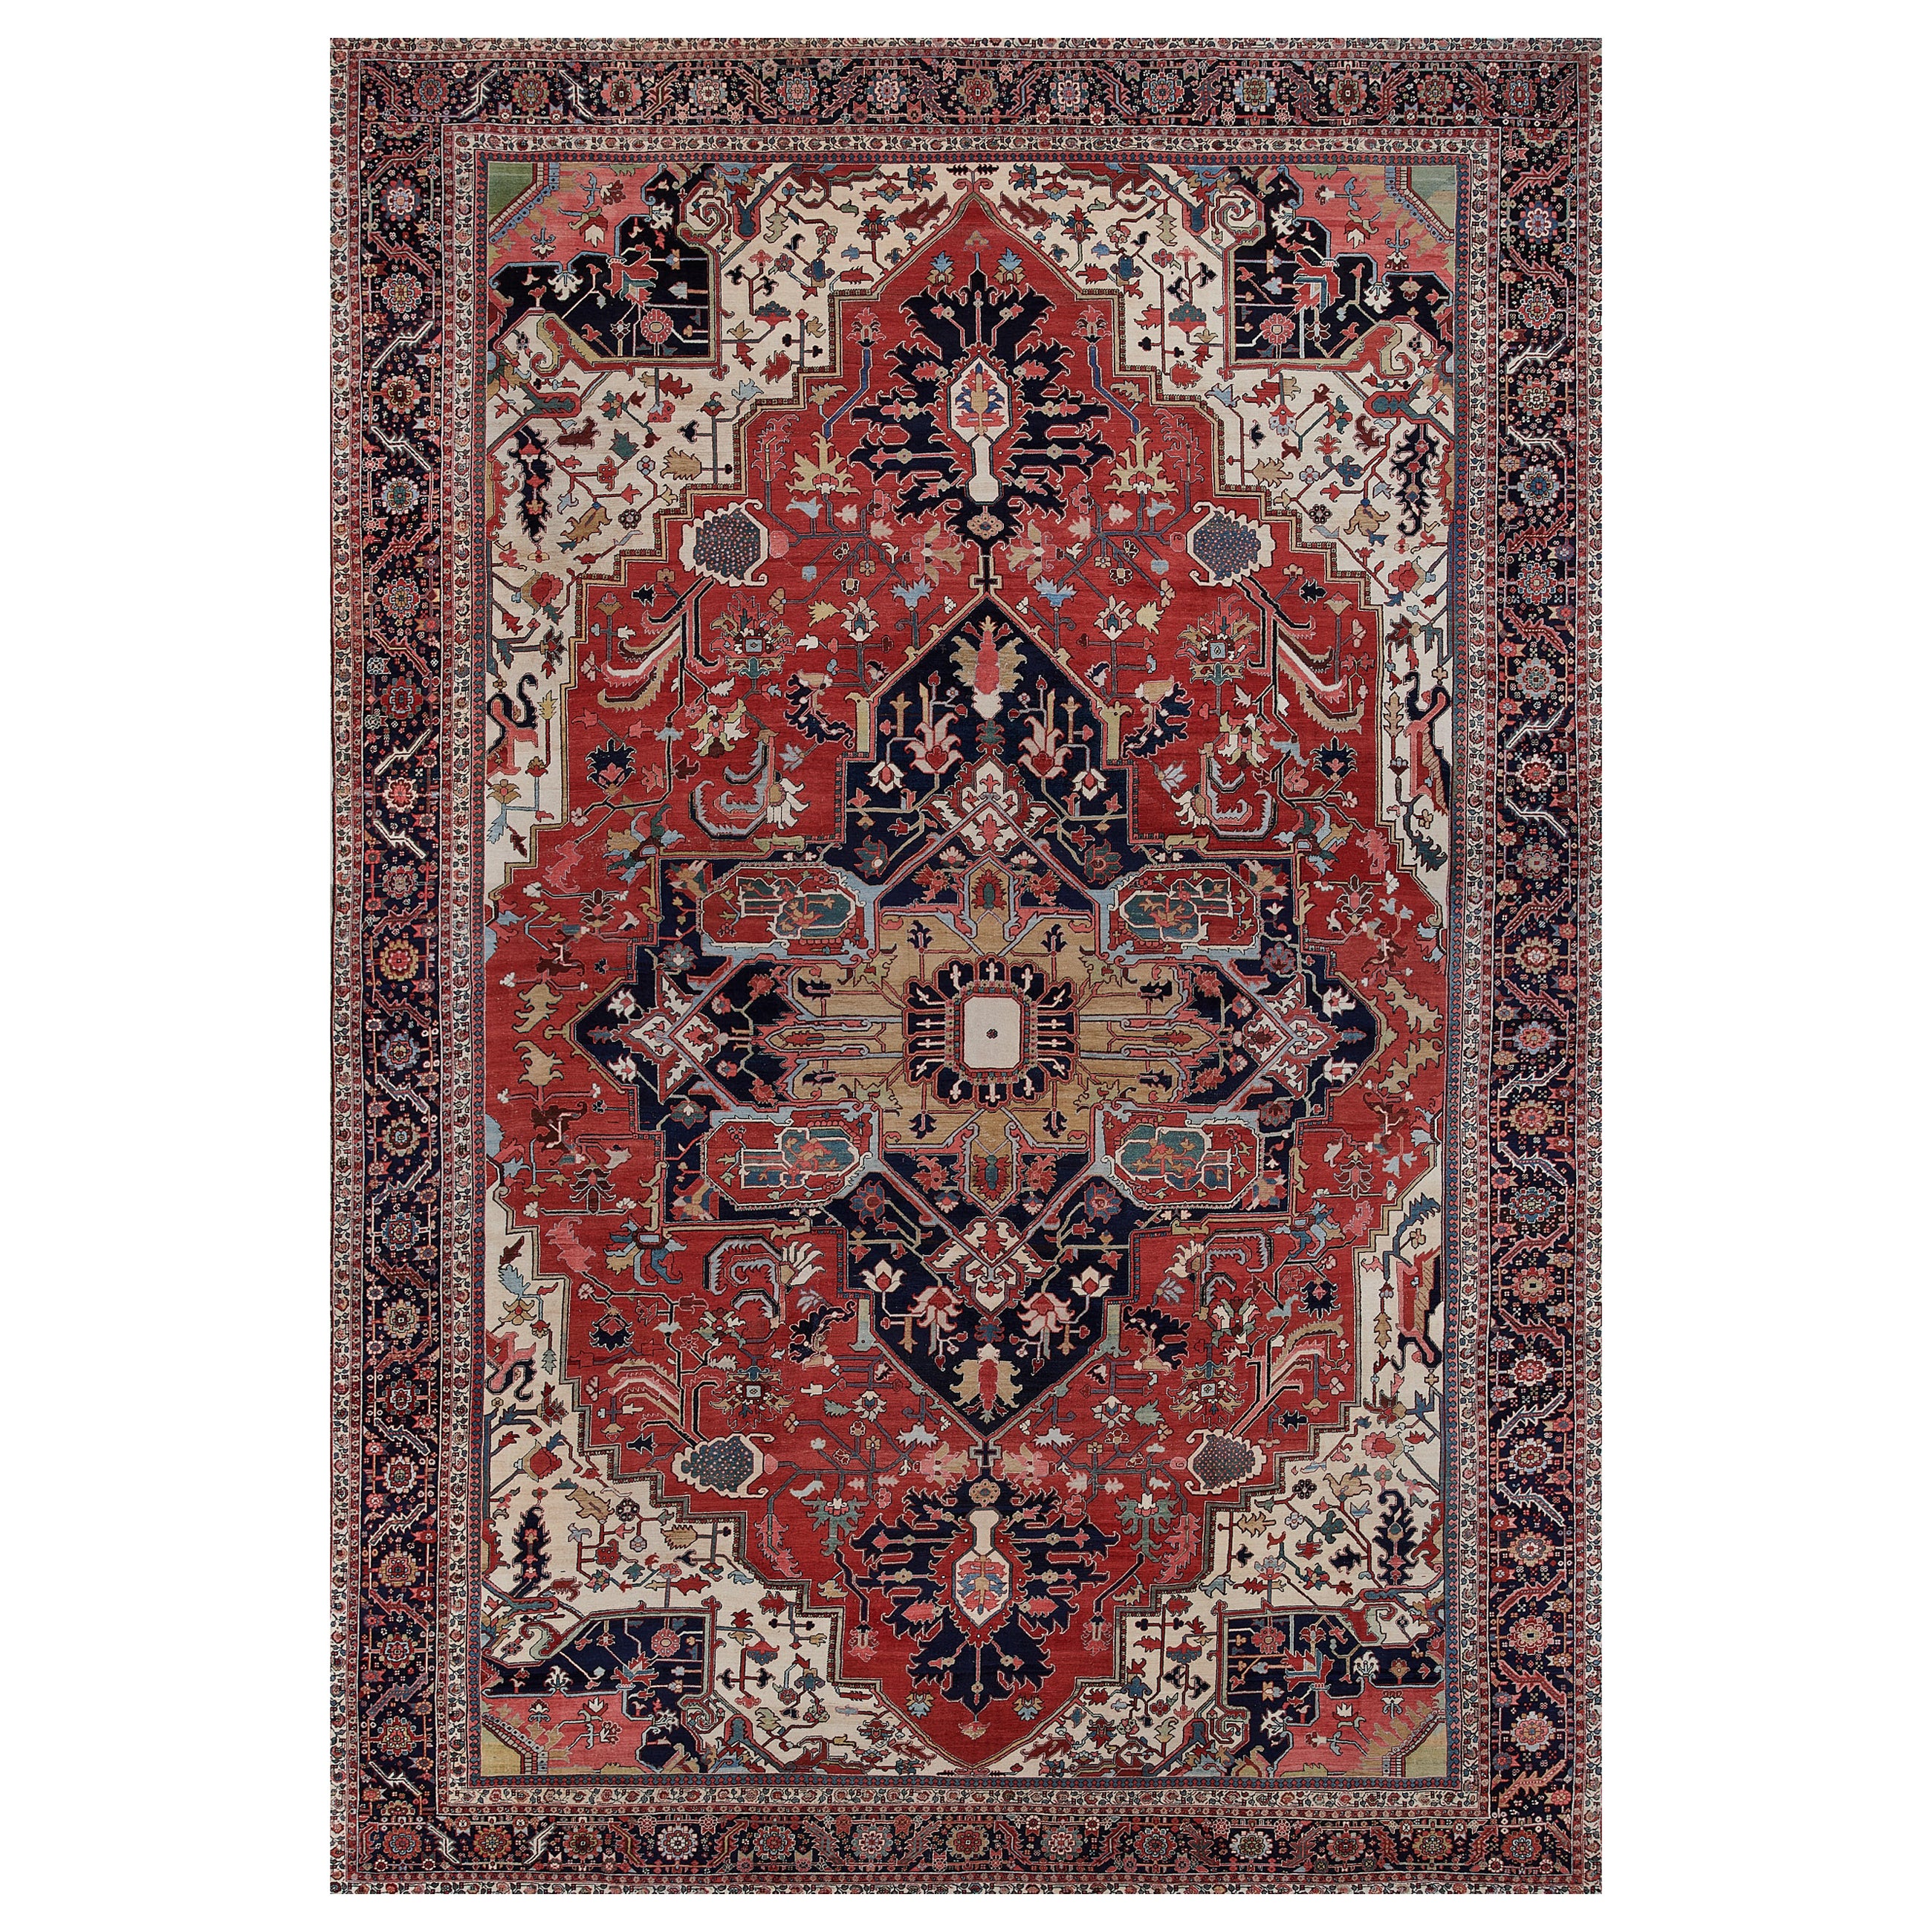 Rare Large-sized Traditional Hand-woven Wool Persian Serapi Rug